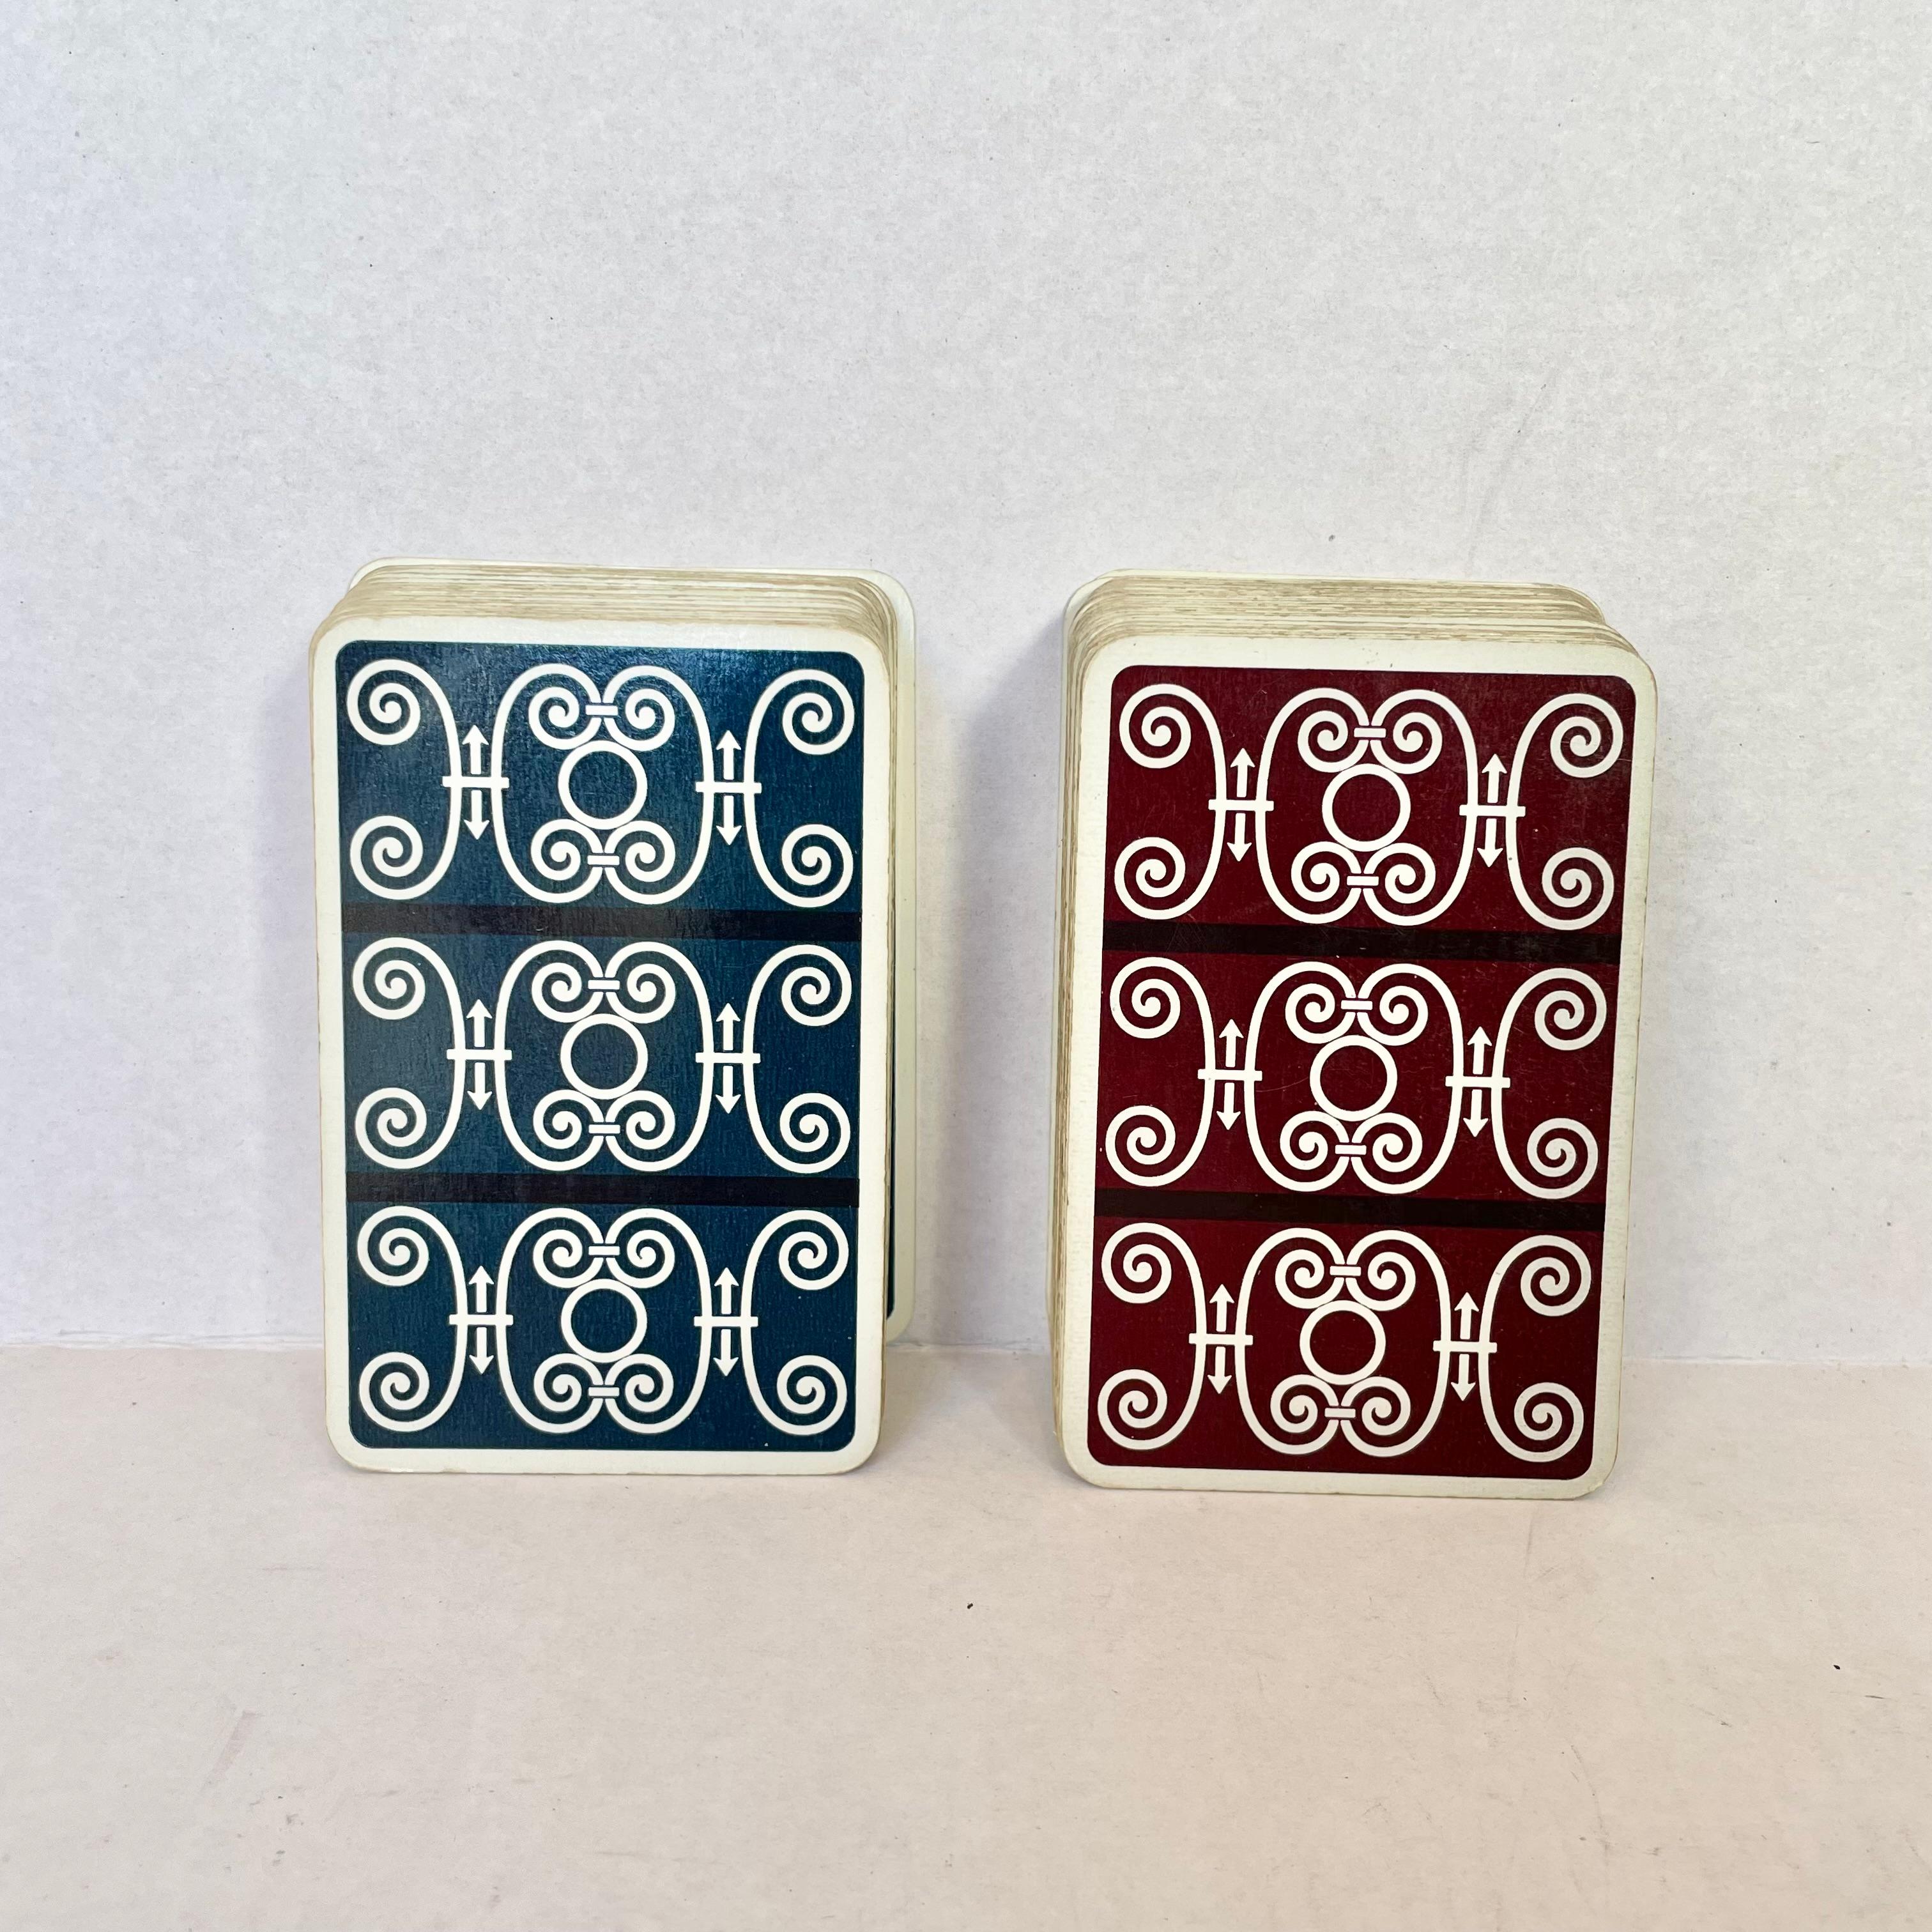 Hermes Playing Cards, 1970s France For Sale 4